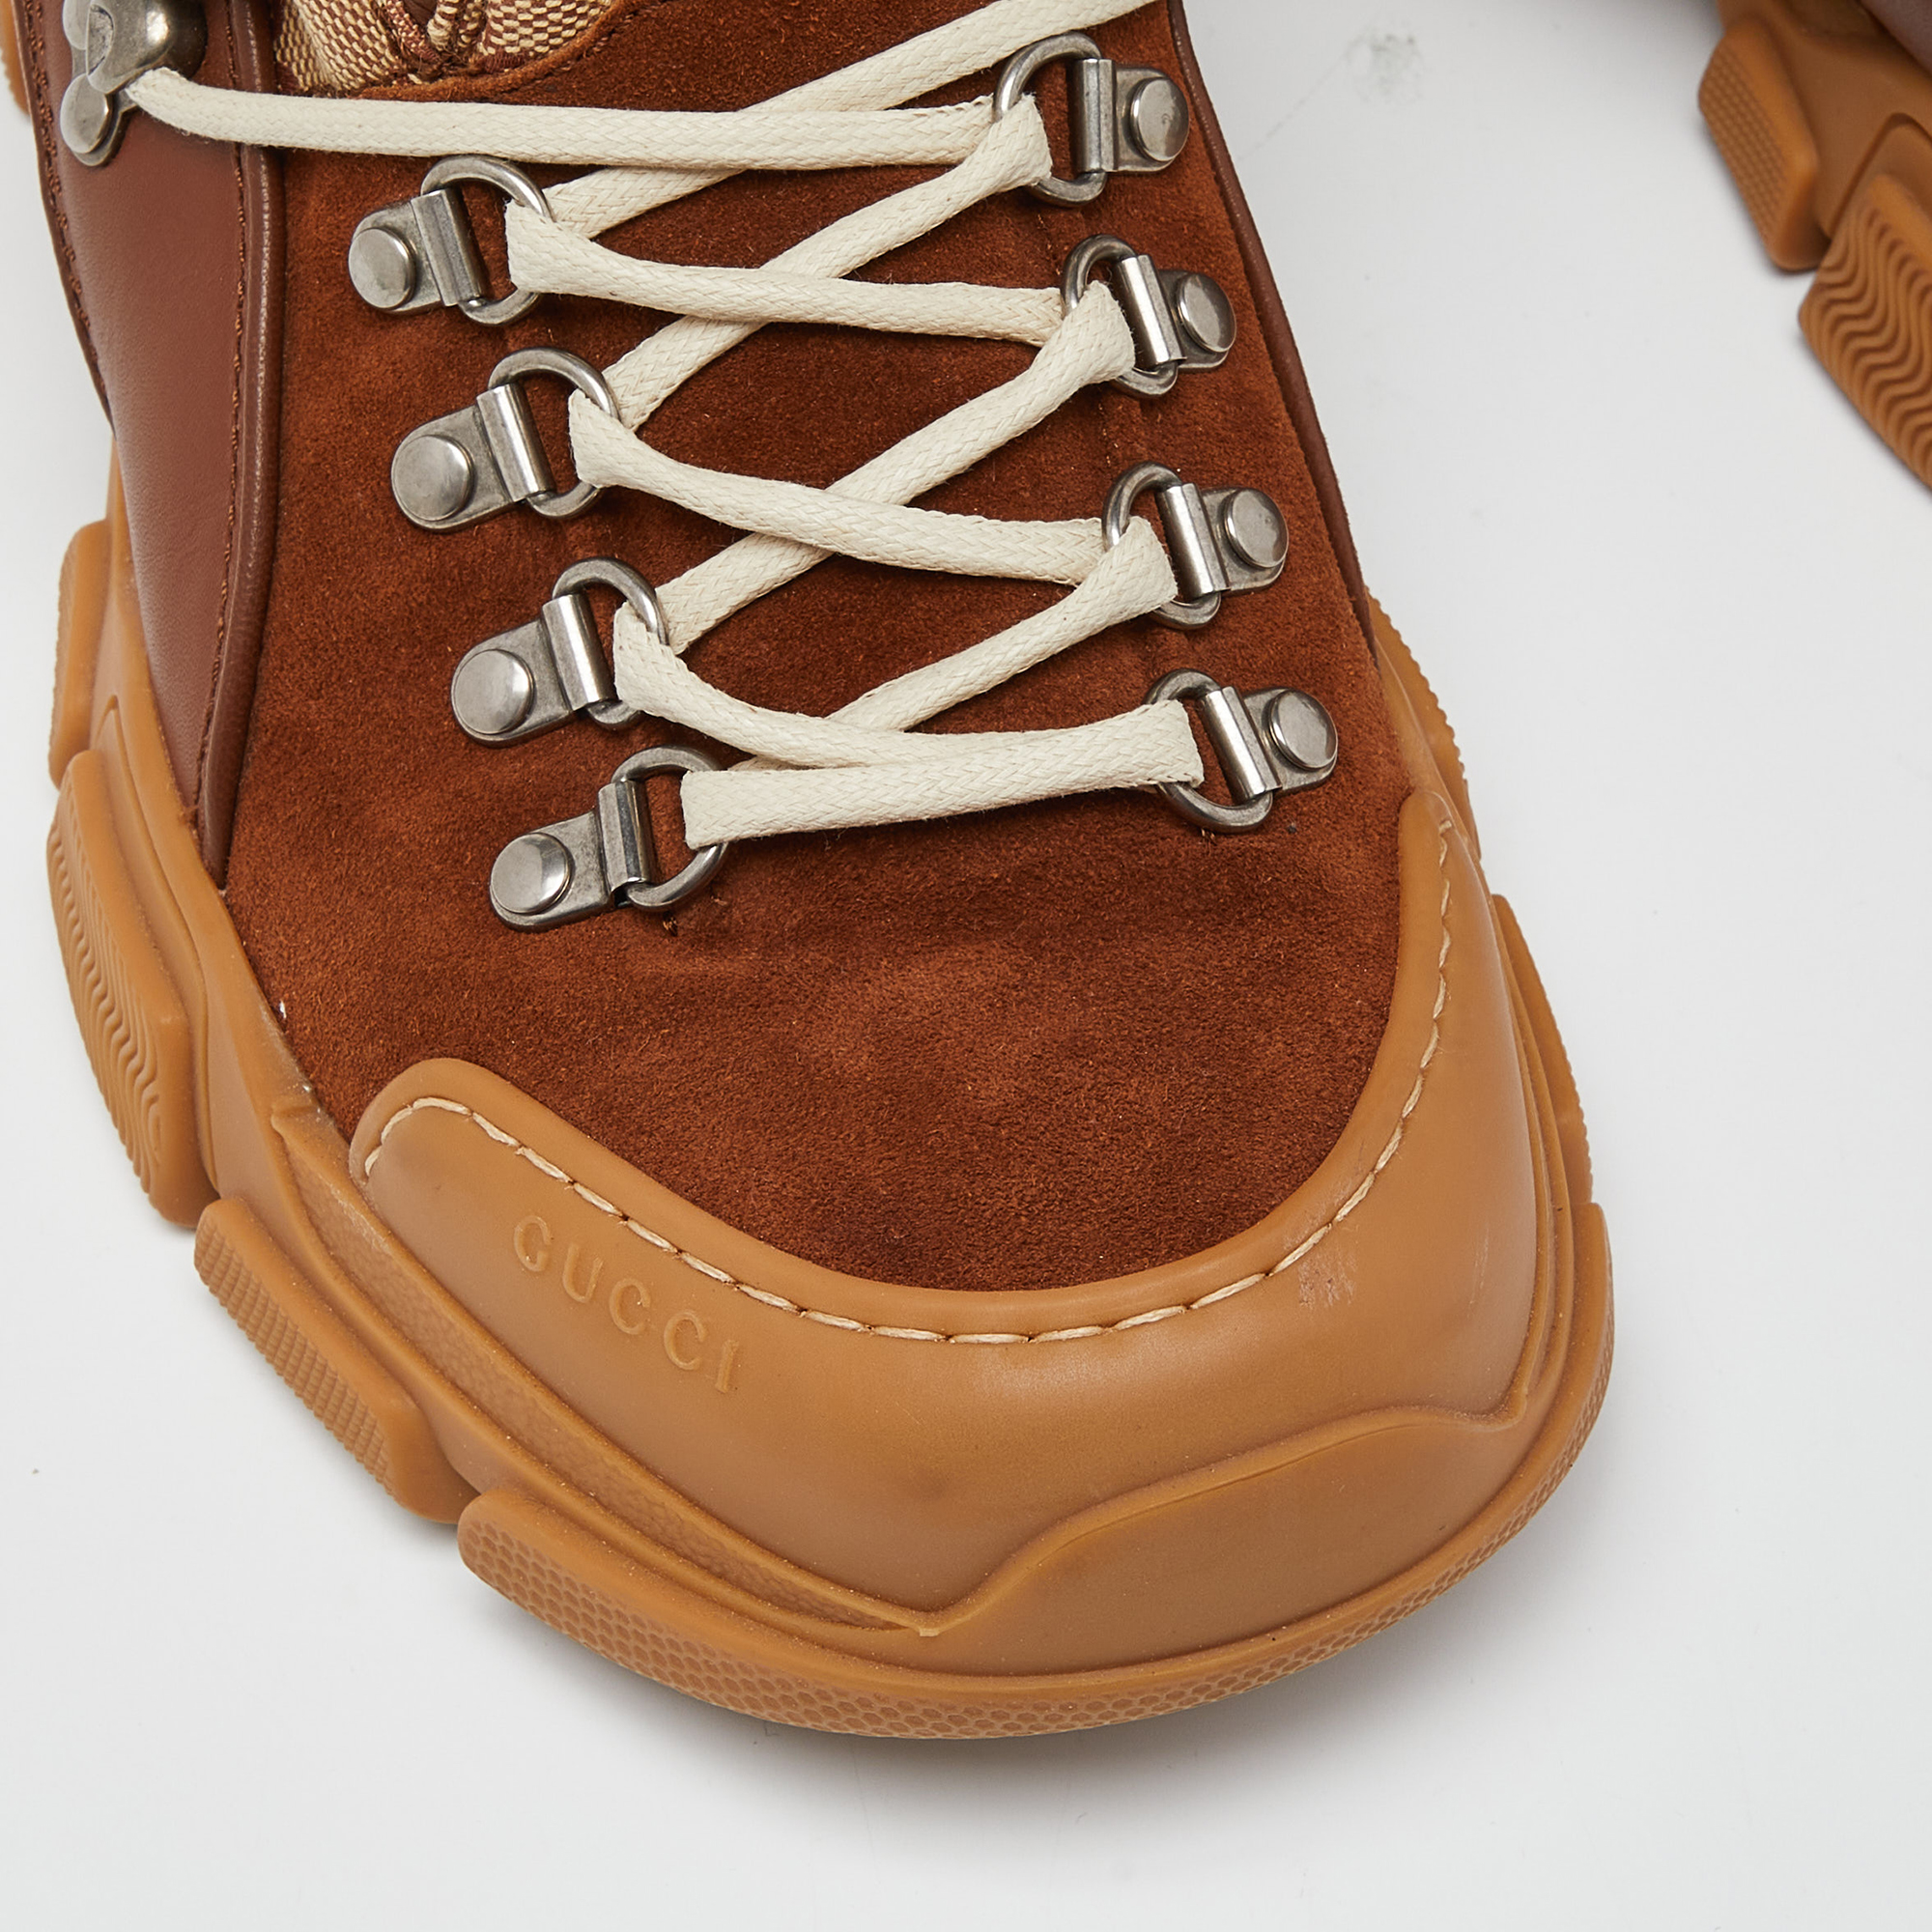 Gucci Brown GG Canvas, Leather And Suede Journey Hiker Boots Size 40